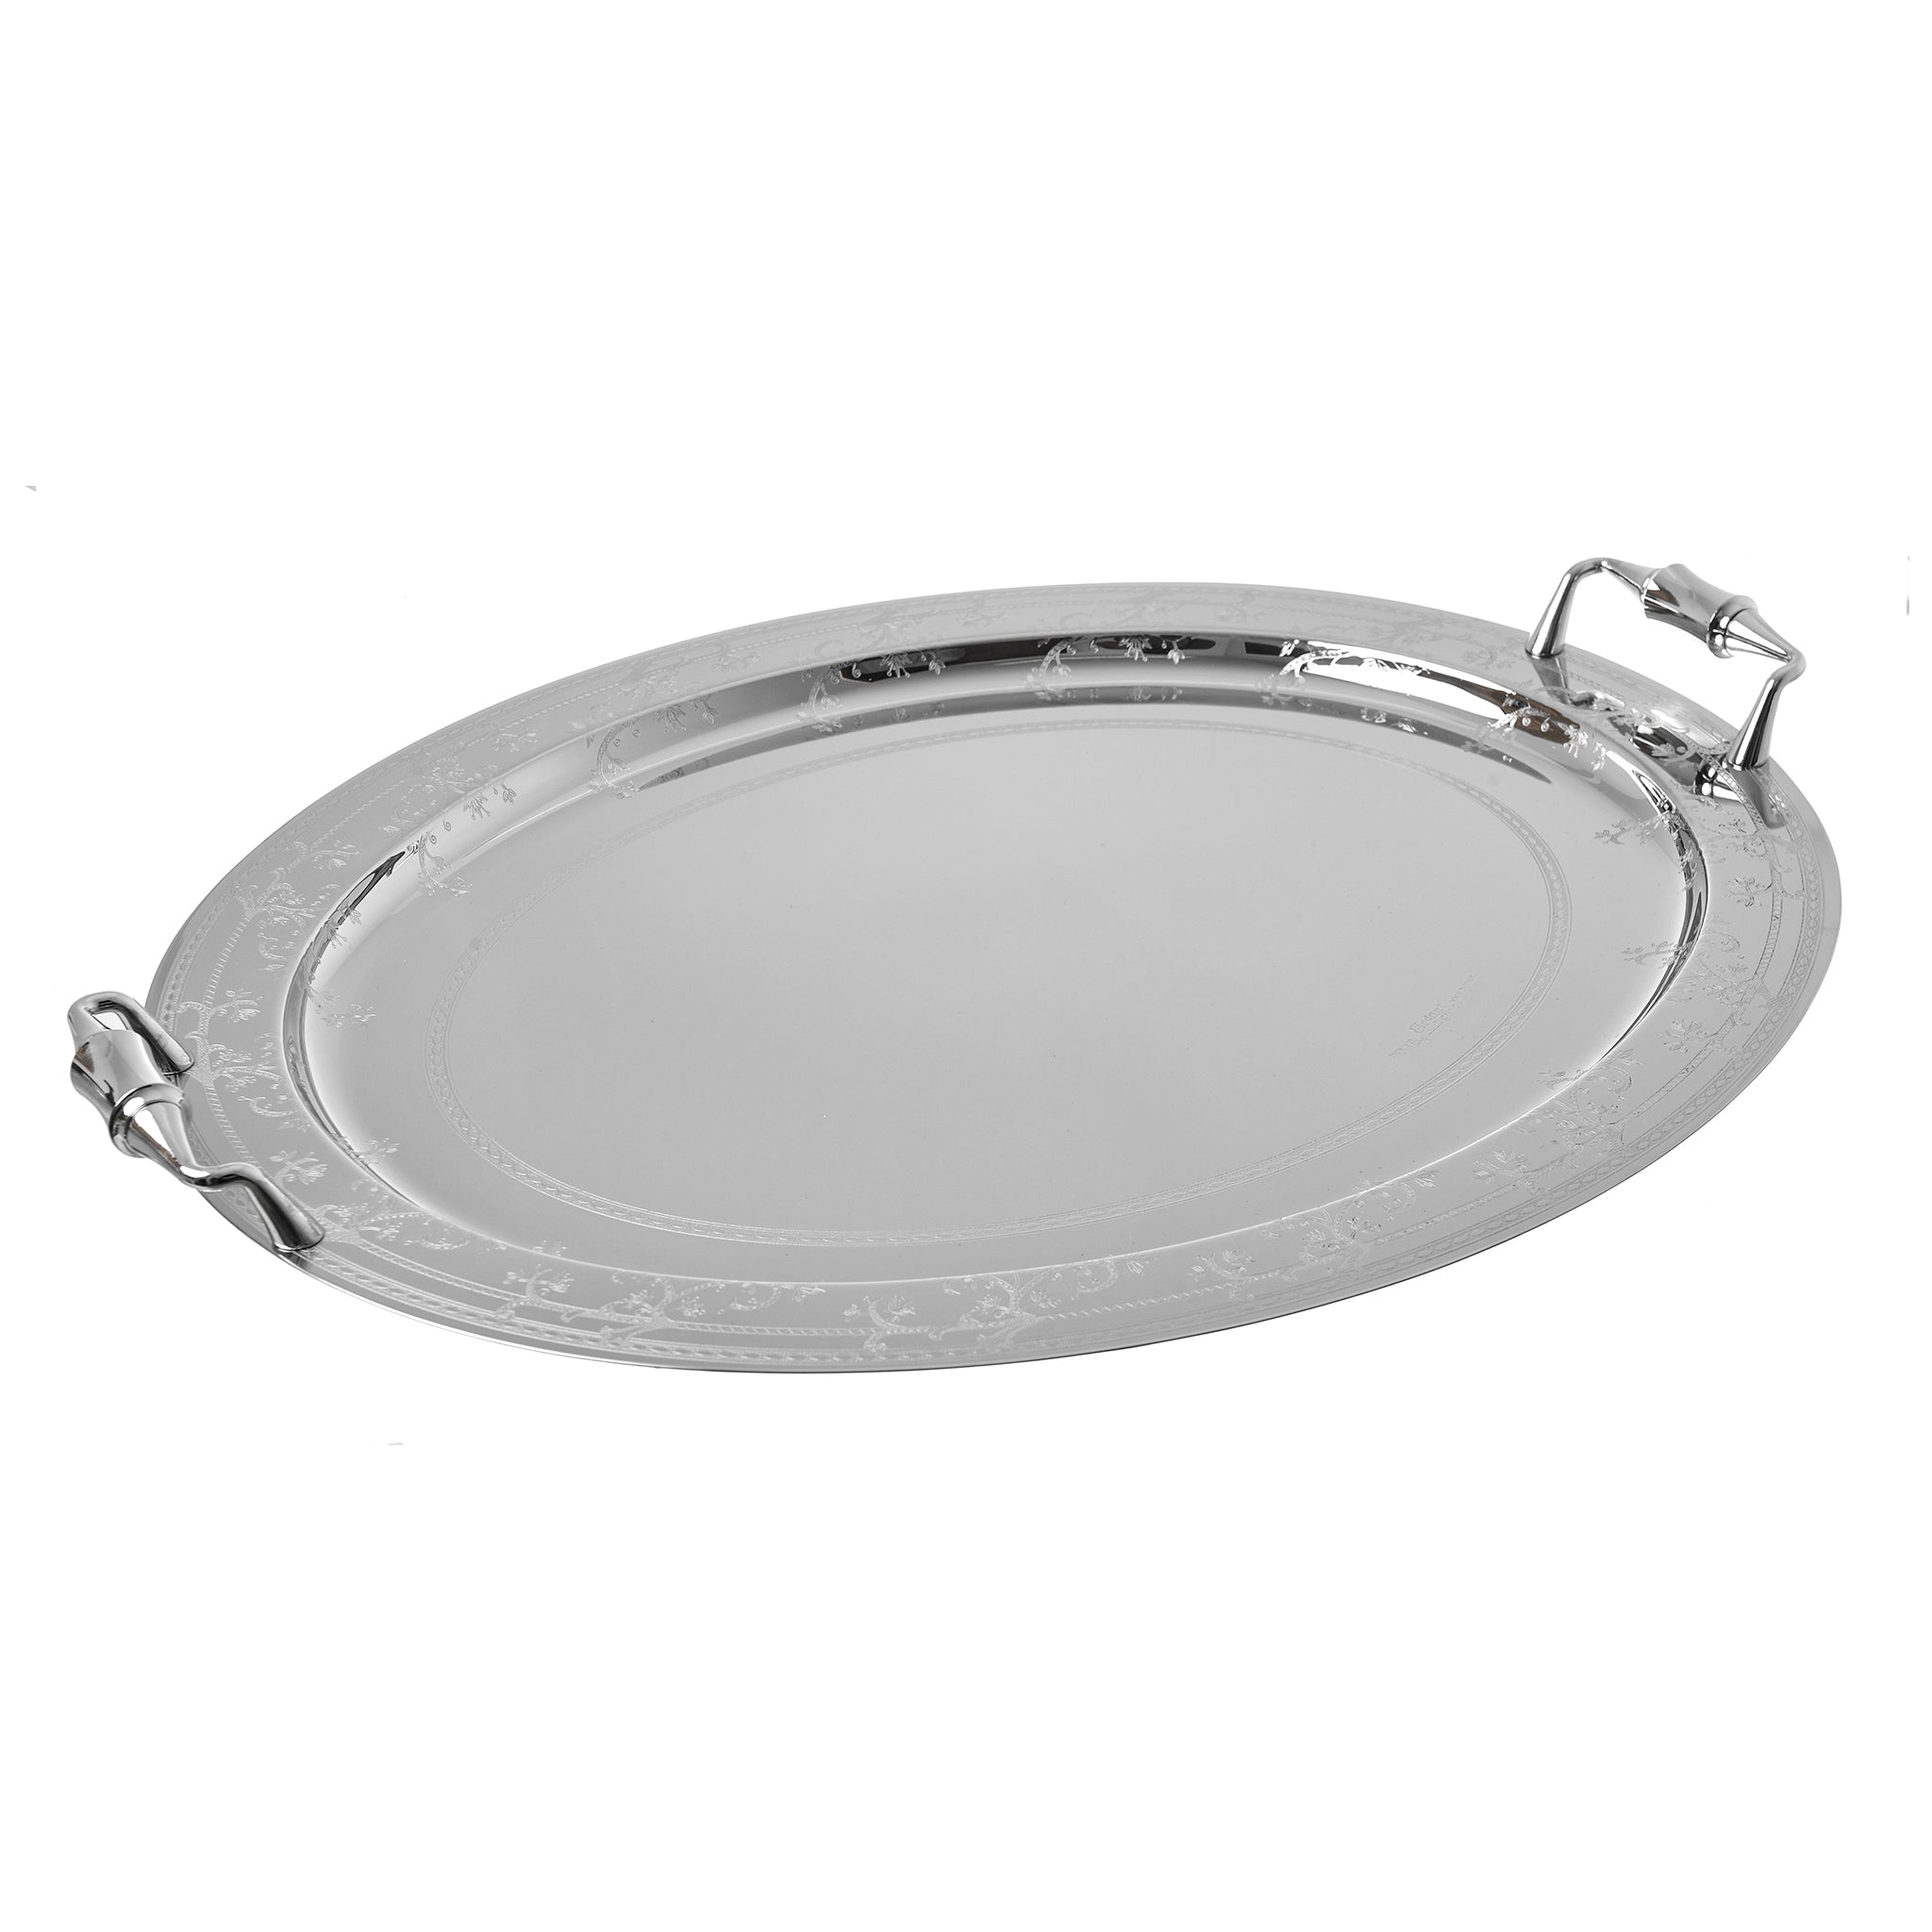 Elegant Gioiel - Oval Tray with Handles - Stainless Steel 18/10 - 52cm - 75000410